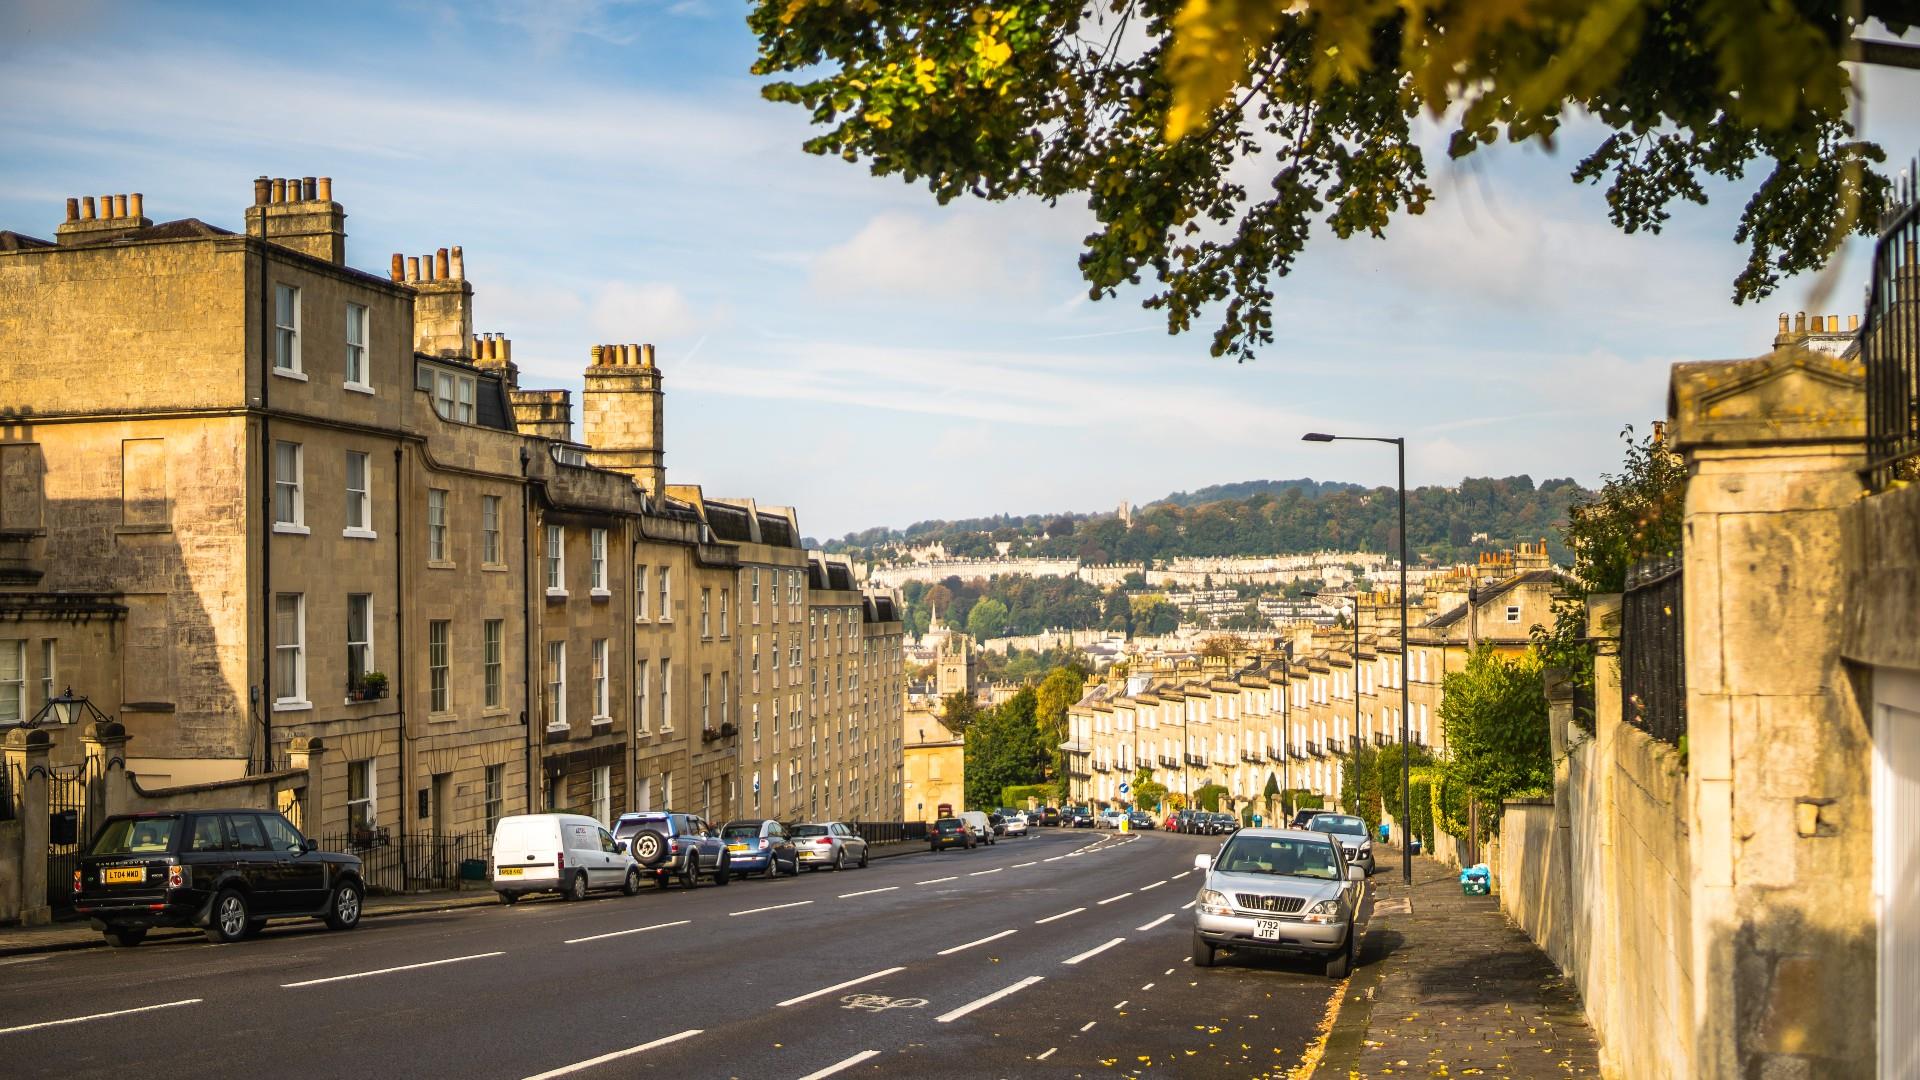 Autumn Hills and Houses in Bath